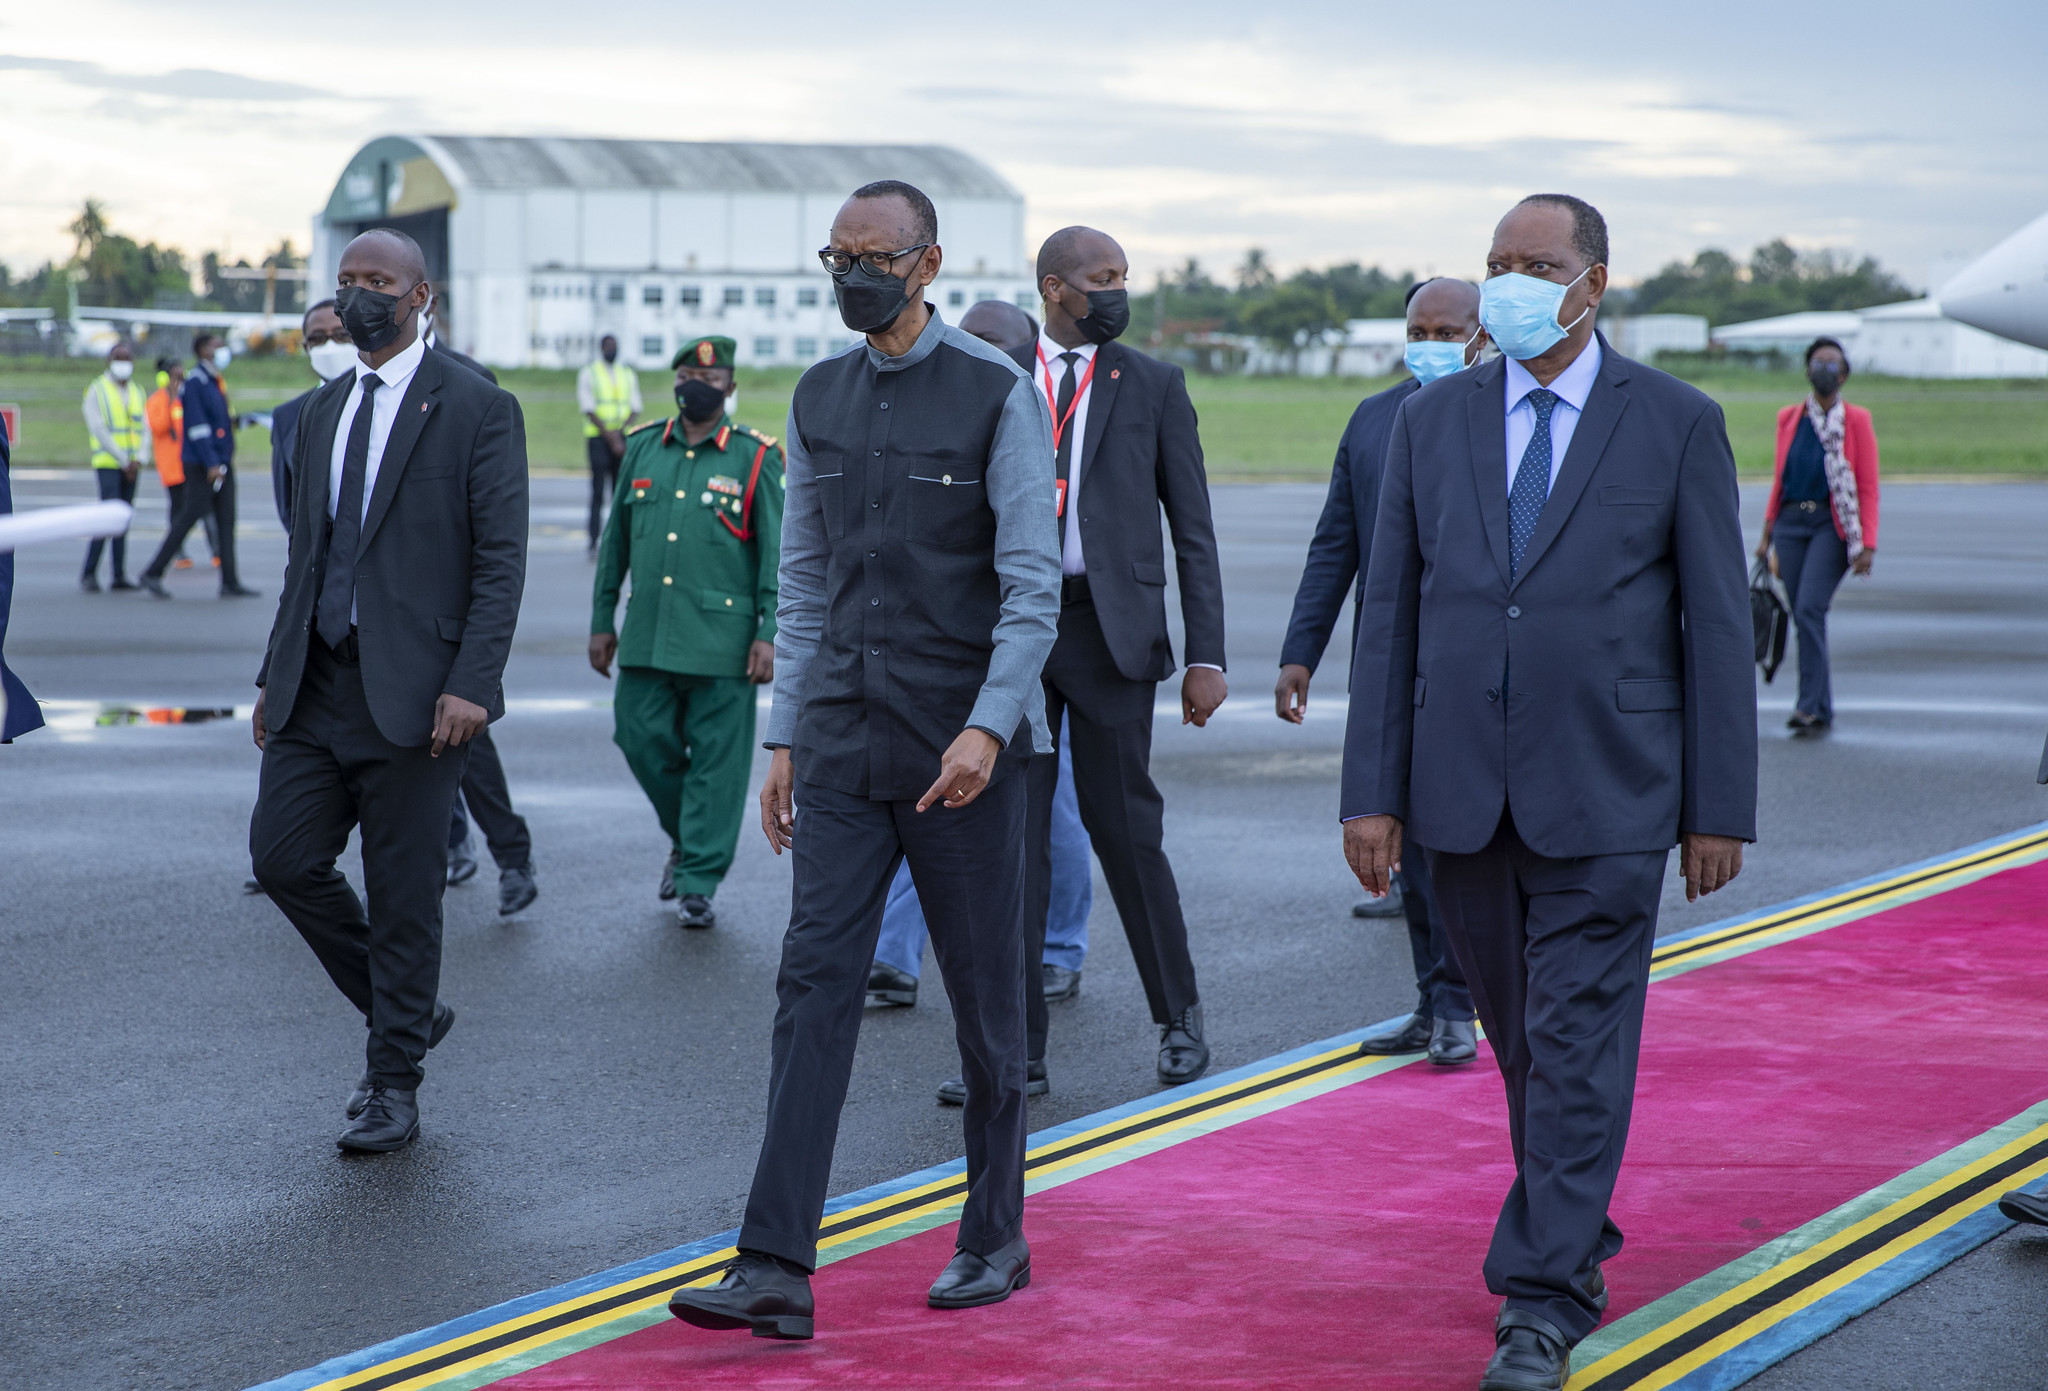 President Kagame in Tanzania for Independence Fete